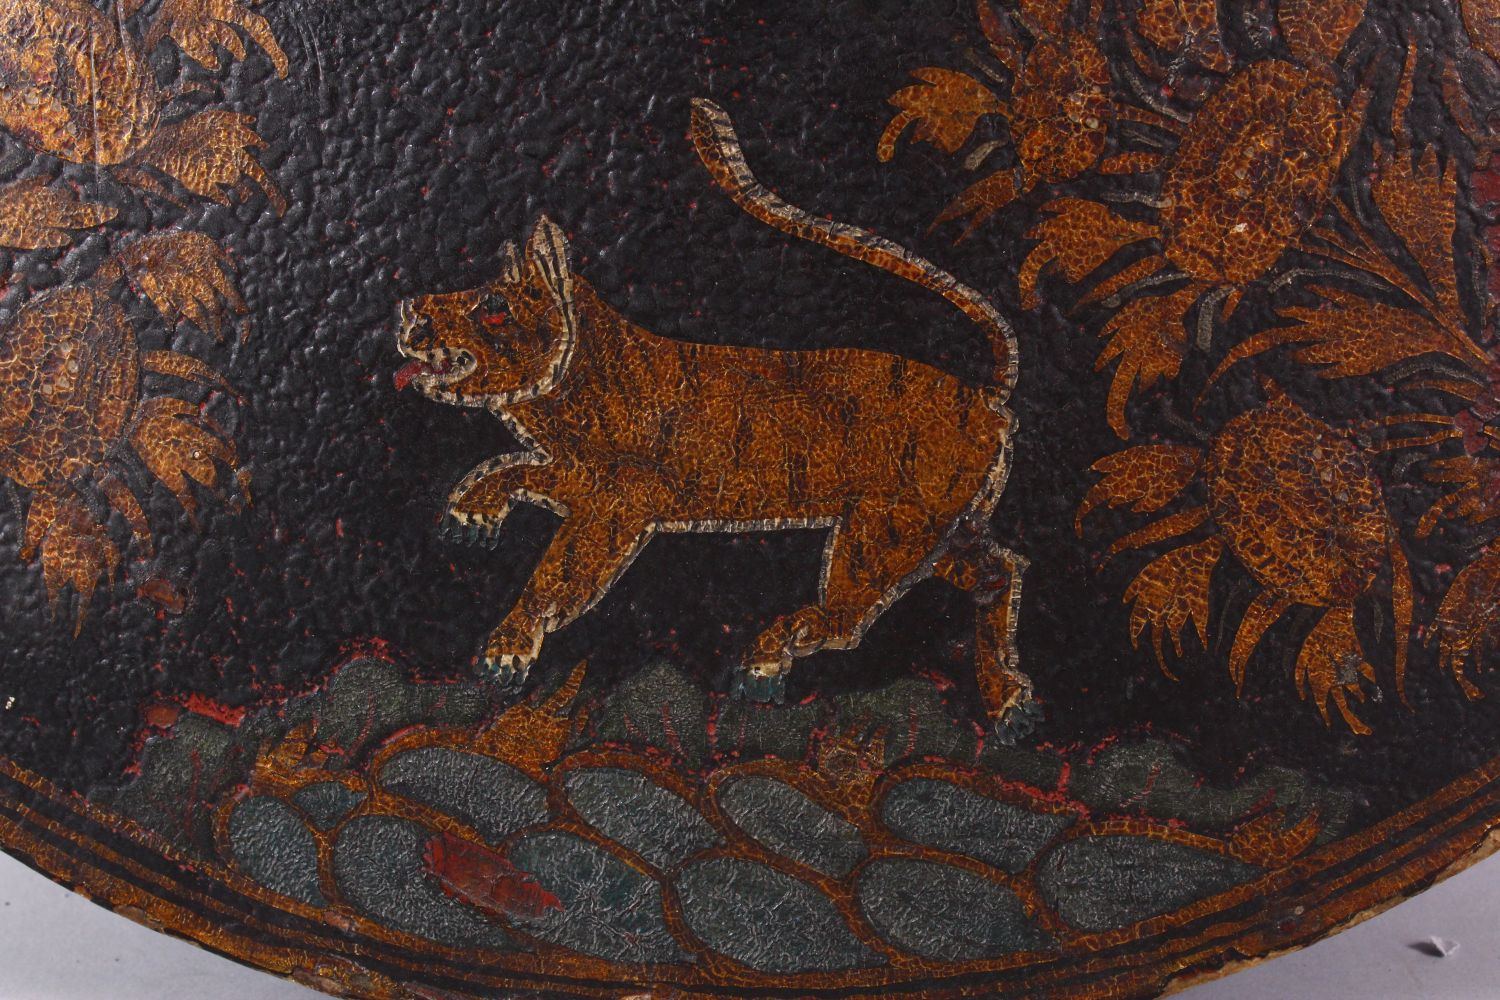 A FINE 18TH/19TH CENTURY INDIAN PAINTED LACQUER LEATHER SHIELD, decorated with a band of tigers, - Image 6 of 10